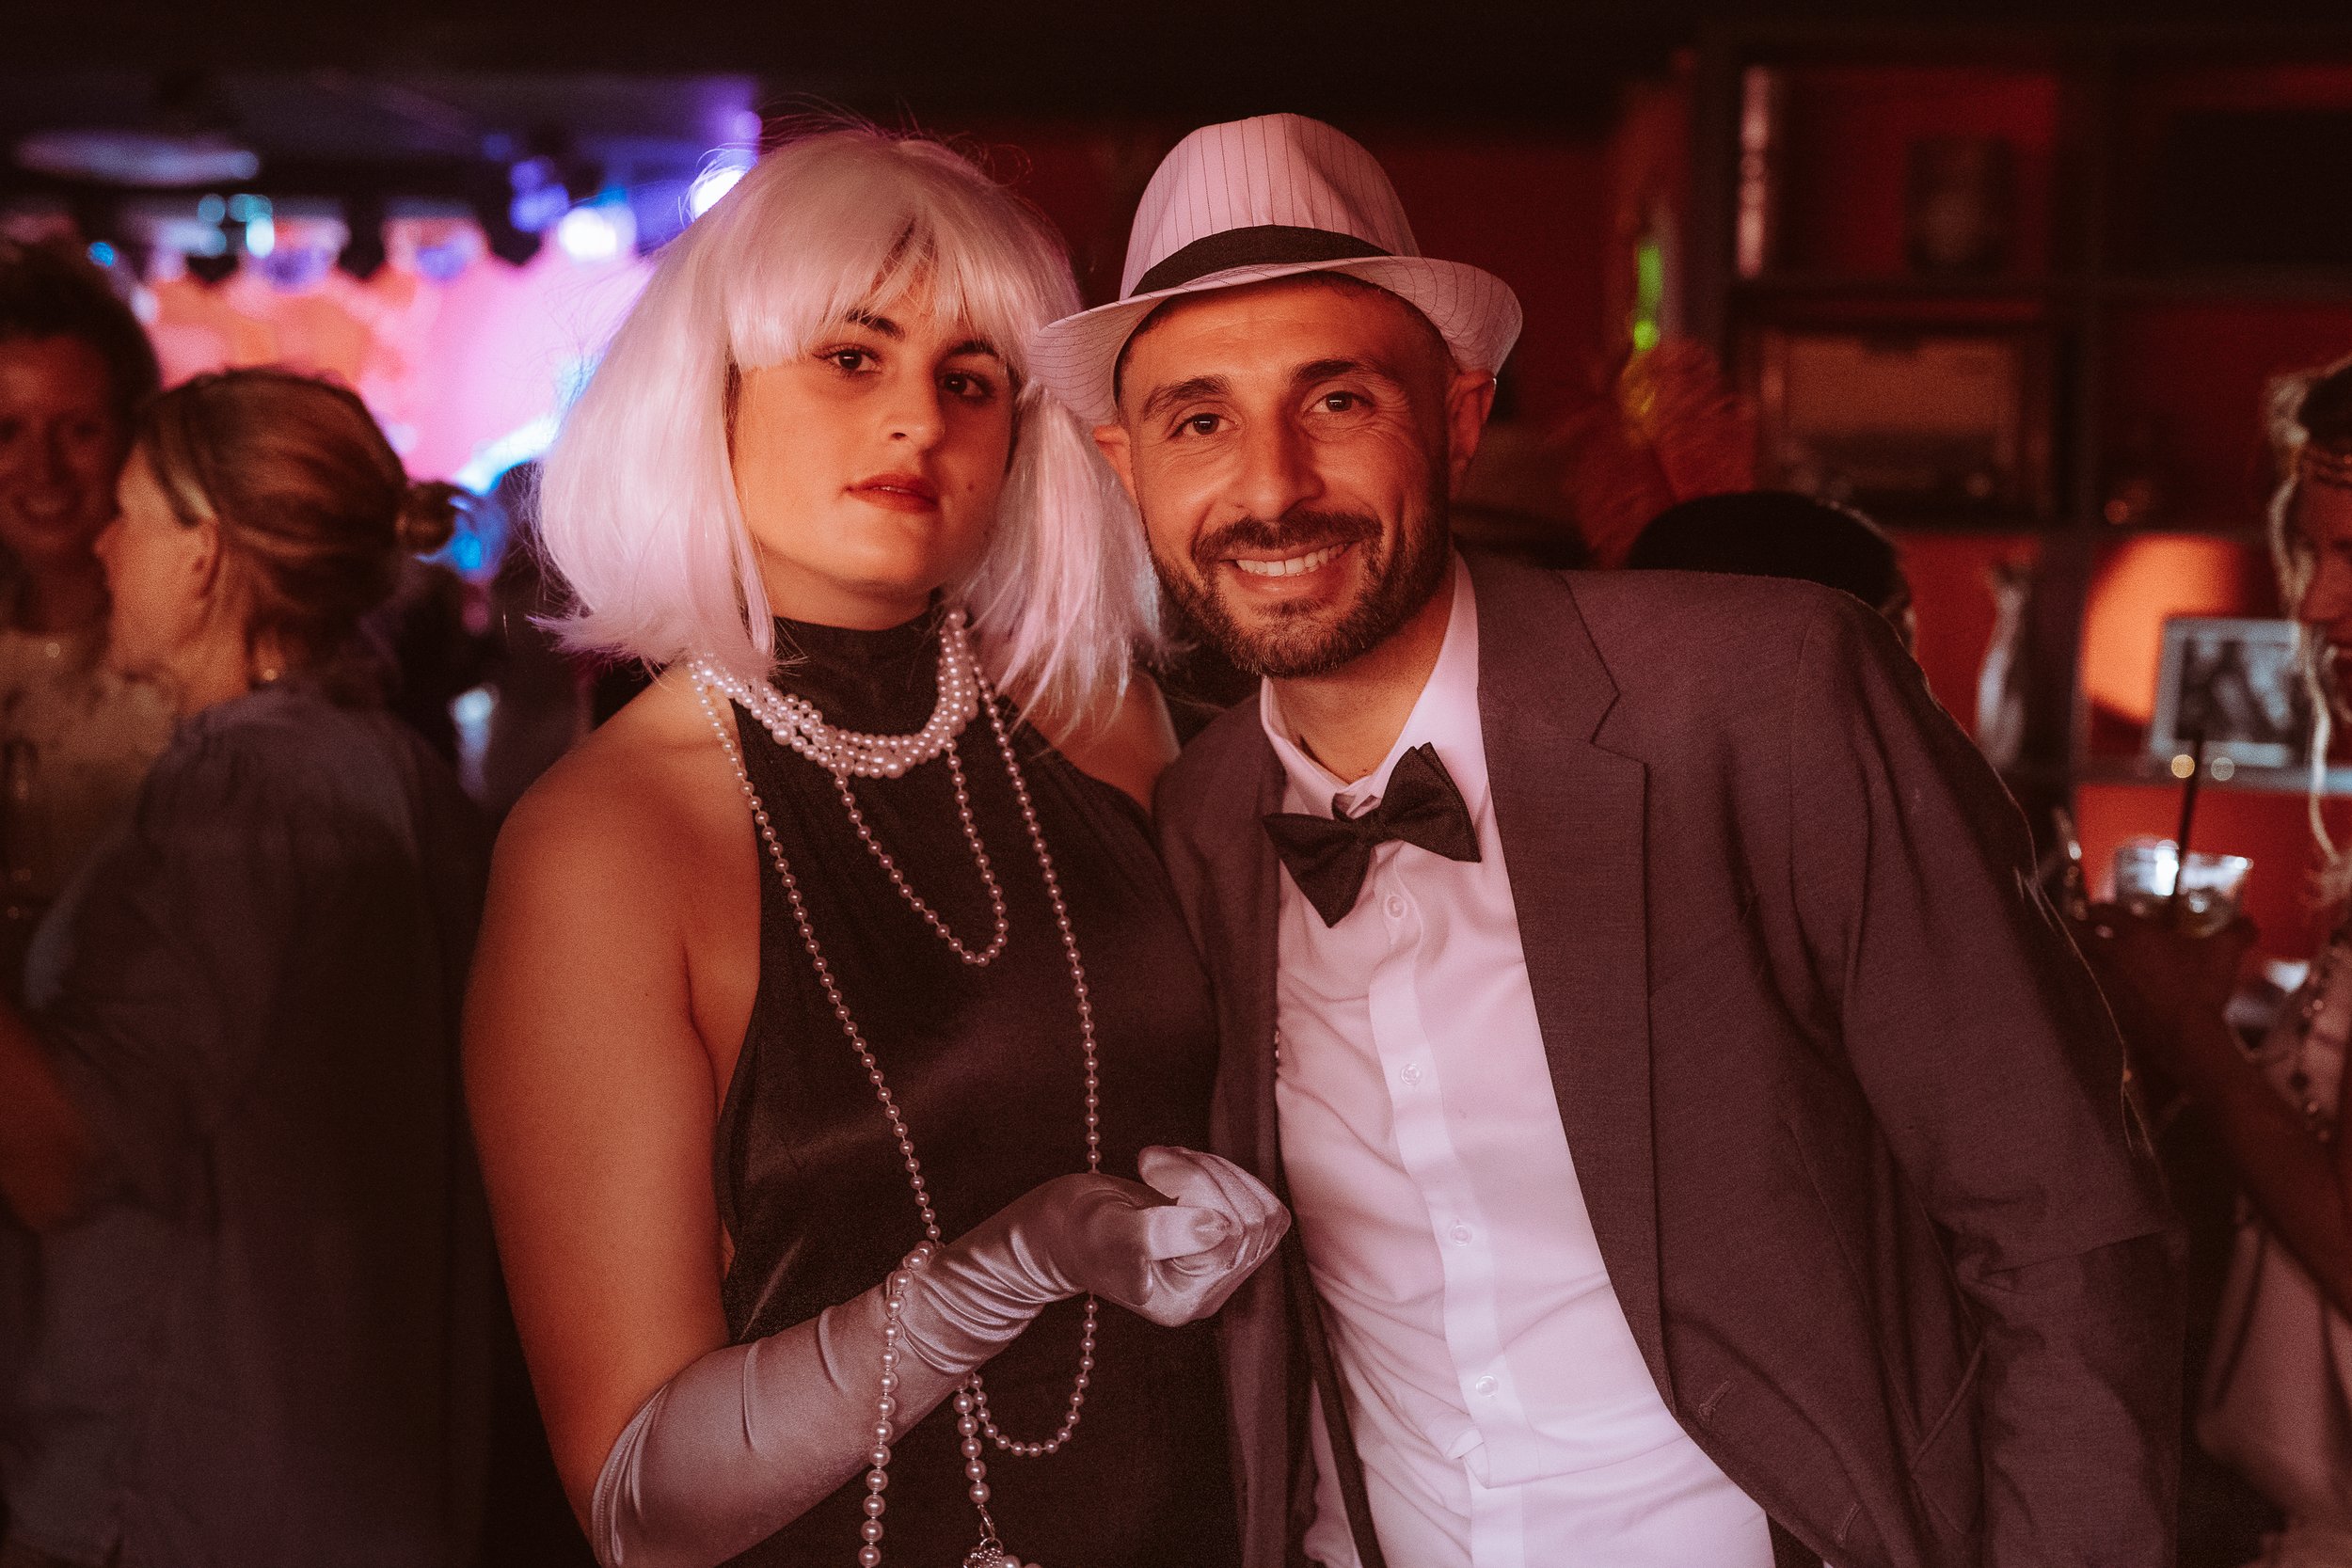 Back to Prohibition Night Party 2.0